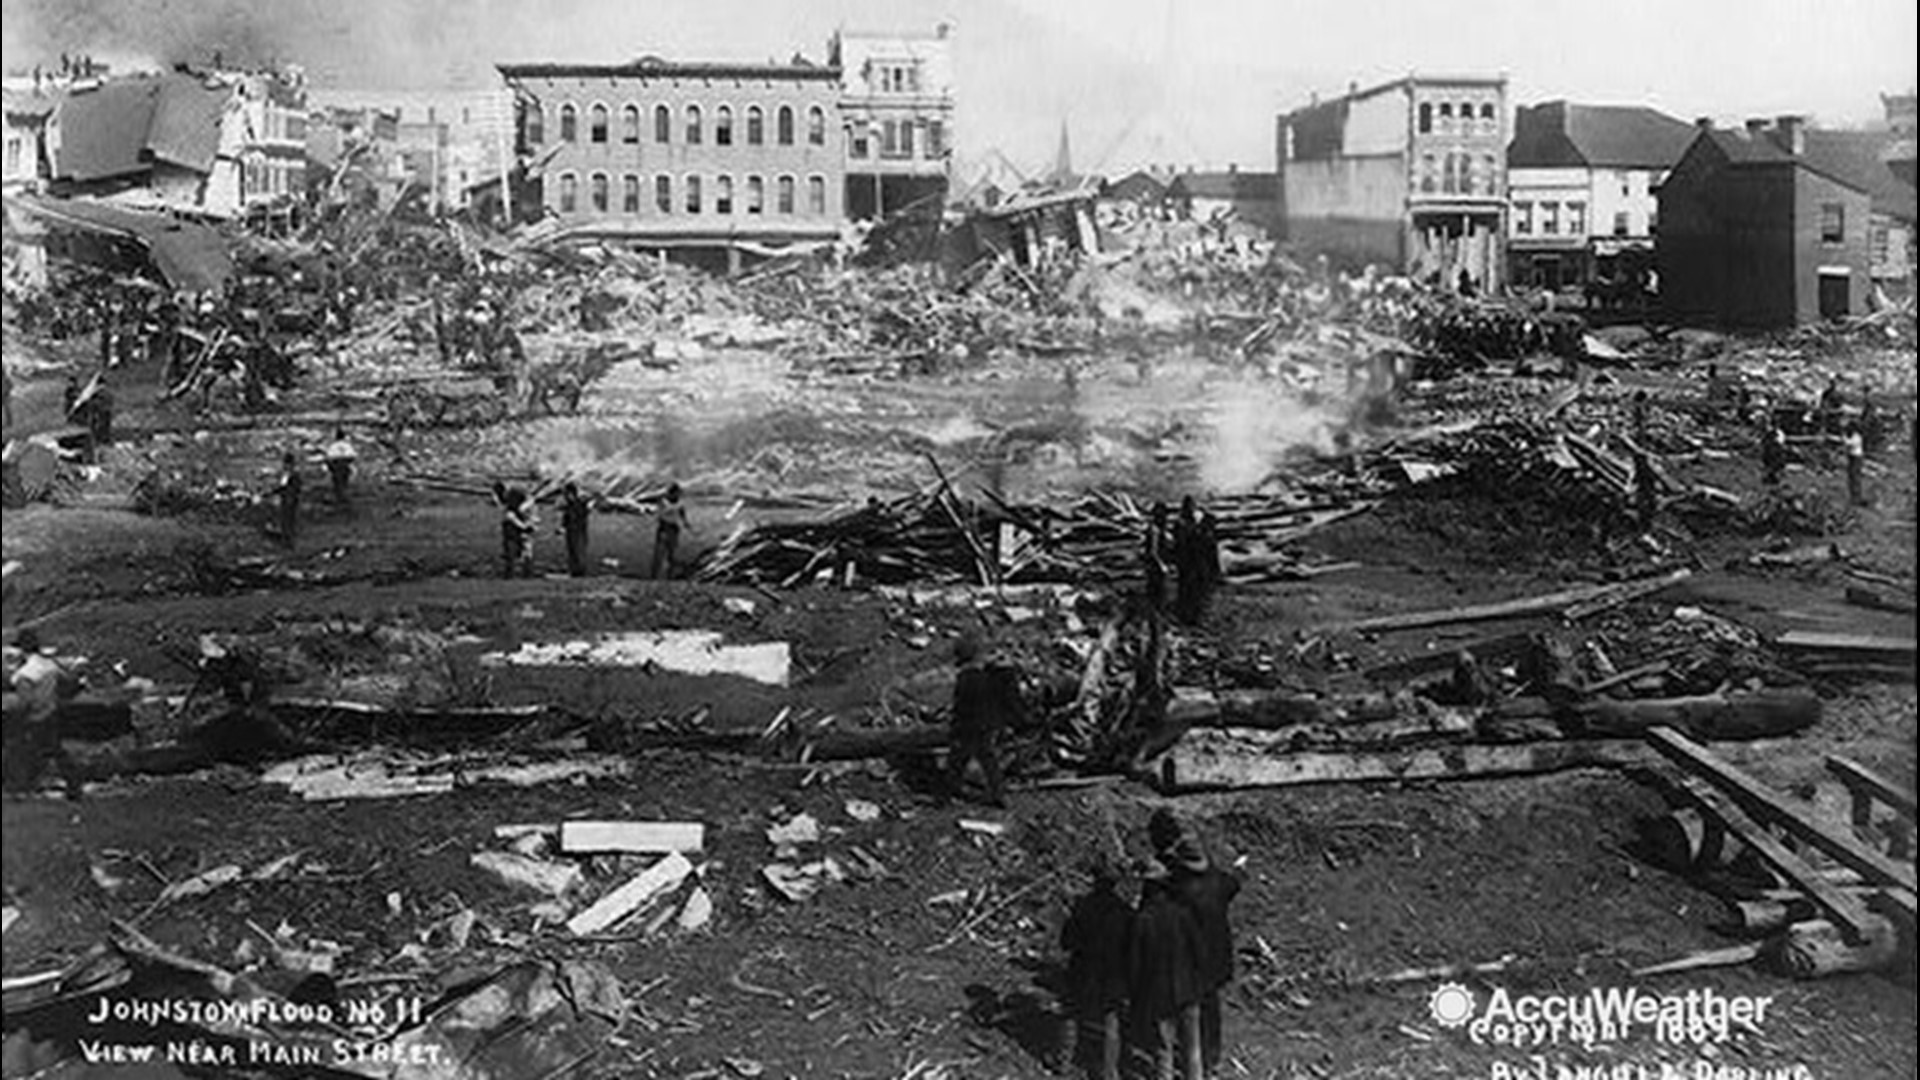 May 31, 2019, marks 130 years since the Johnstown Flood wiped out the entire town in minutes, killing 2,209 people. At the time, it was the deadliest disaster America had ever experienced. Here's how it happened.